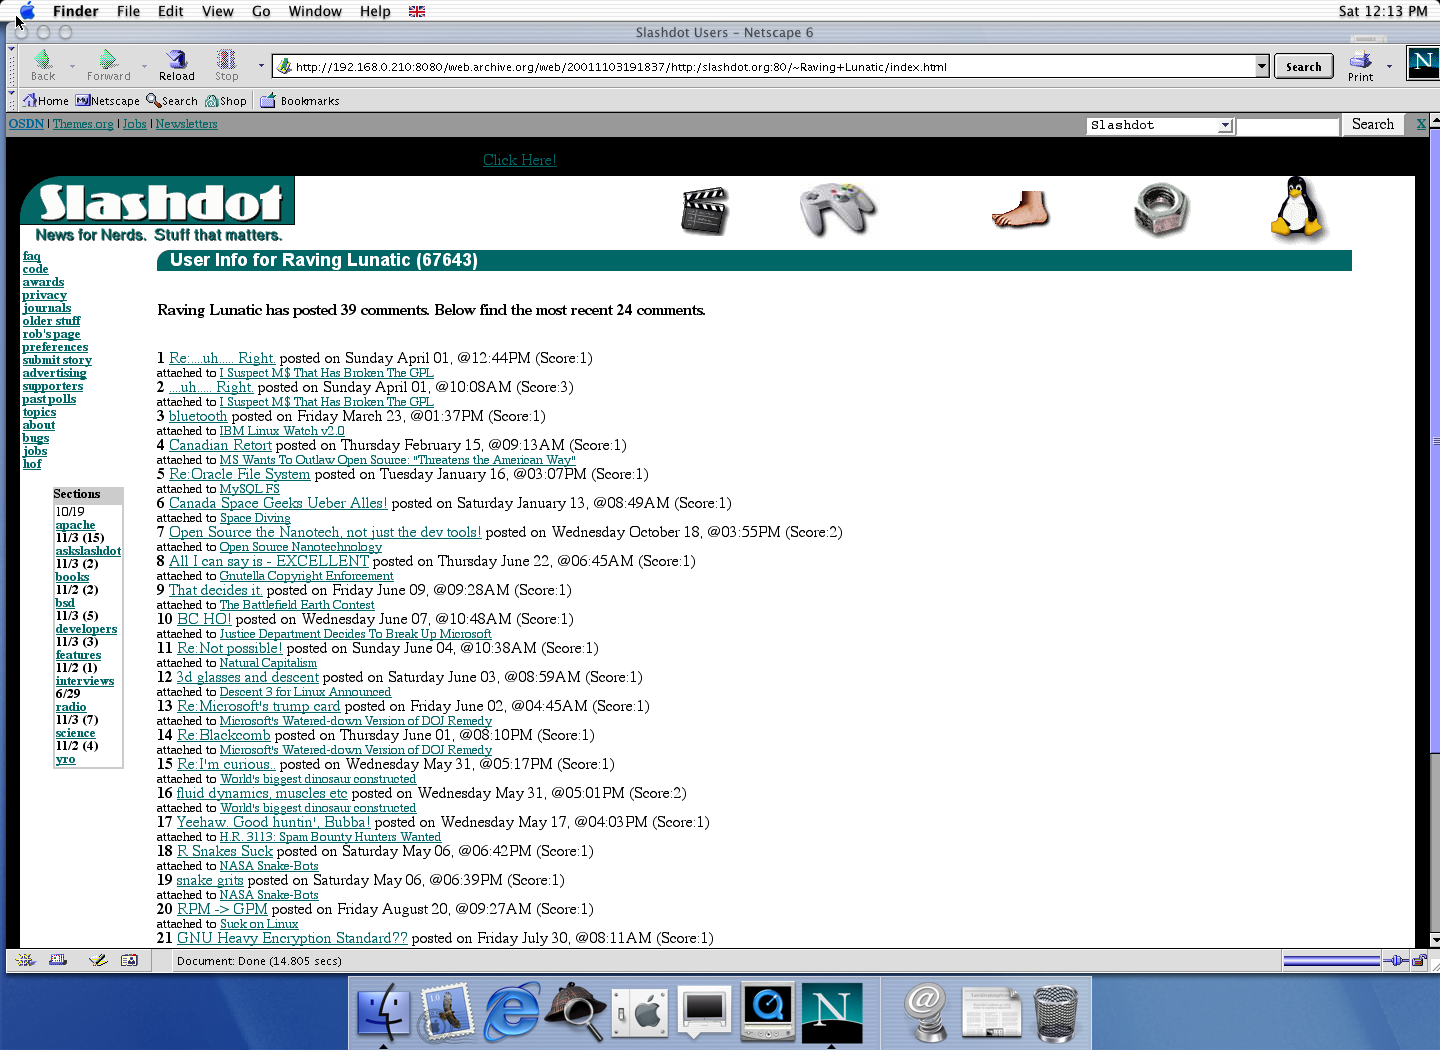 OS X 10.0 PPC with Netscape 6.1 displaying a page from Slashdot archived at November 03, 2001 at 19:18:37